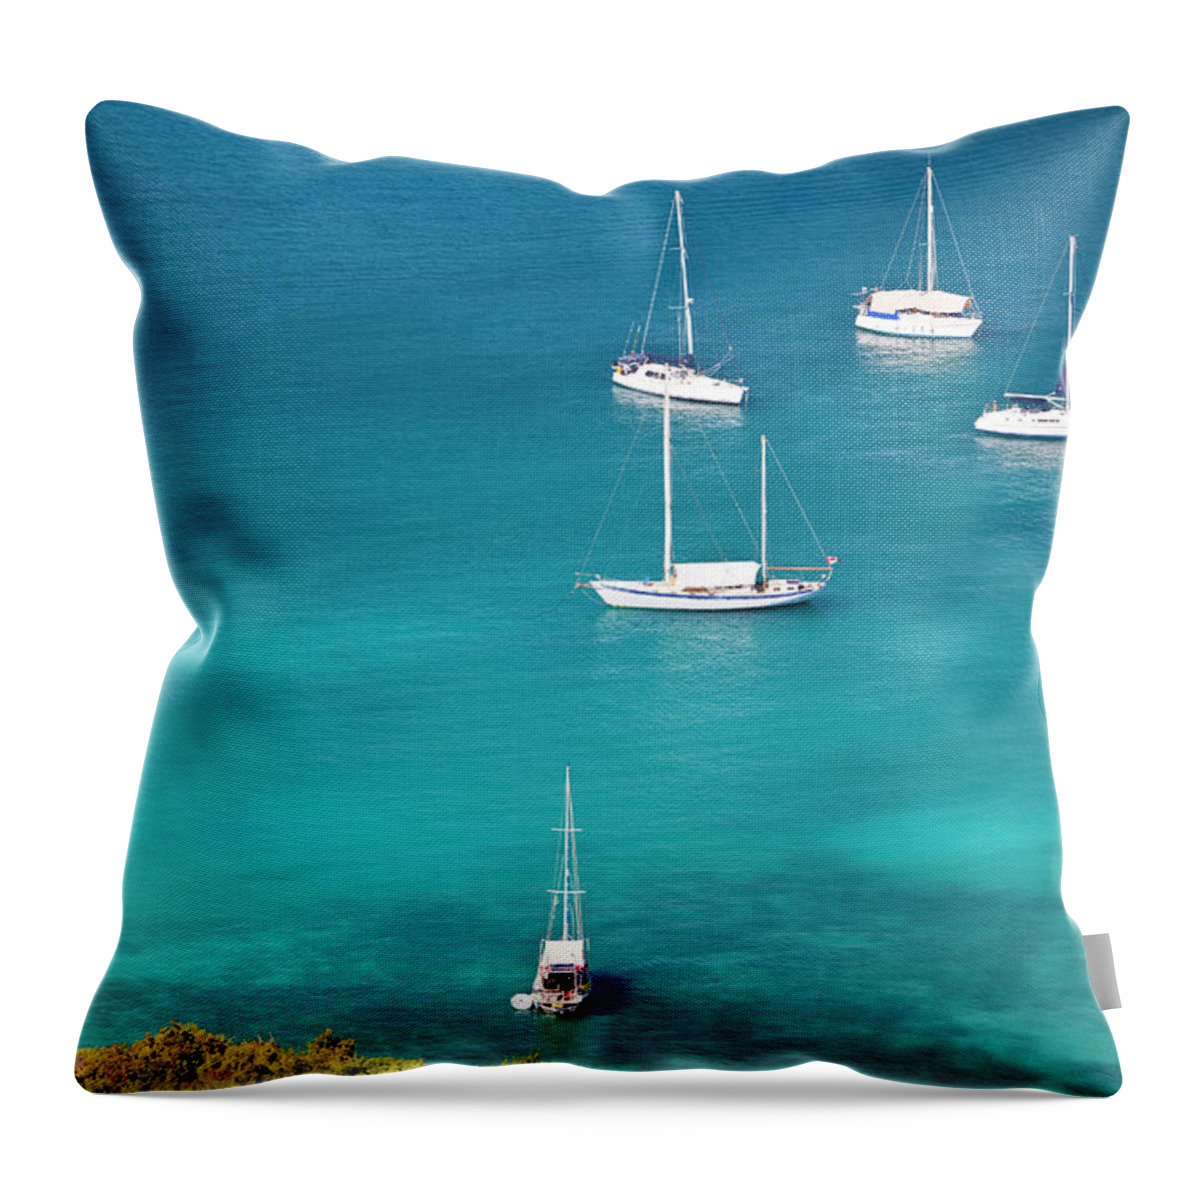 Water's Edge Throw Pillow featuring the photograph Sailboats In Turquiose Waters by Michaelutech